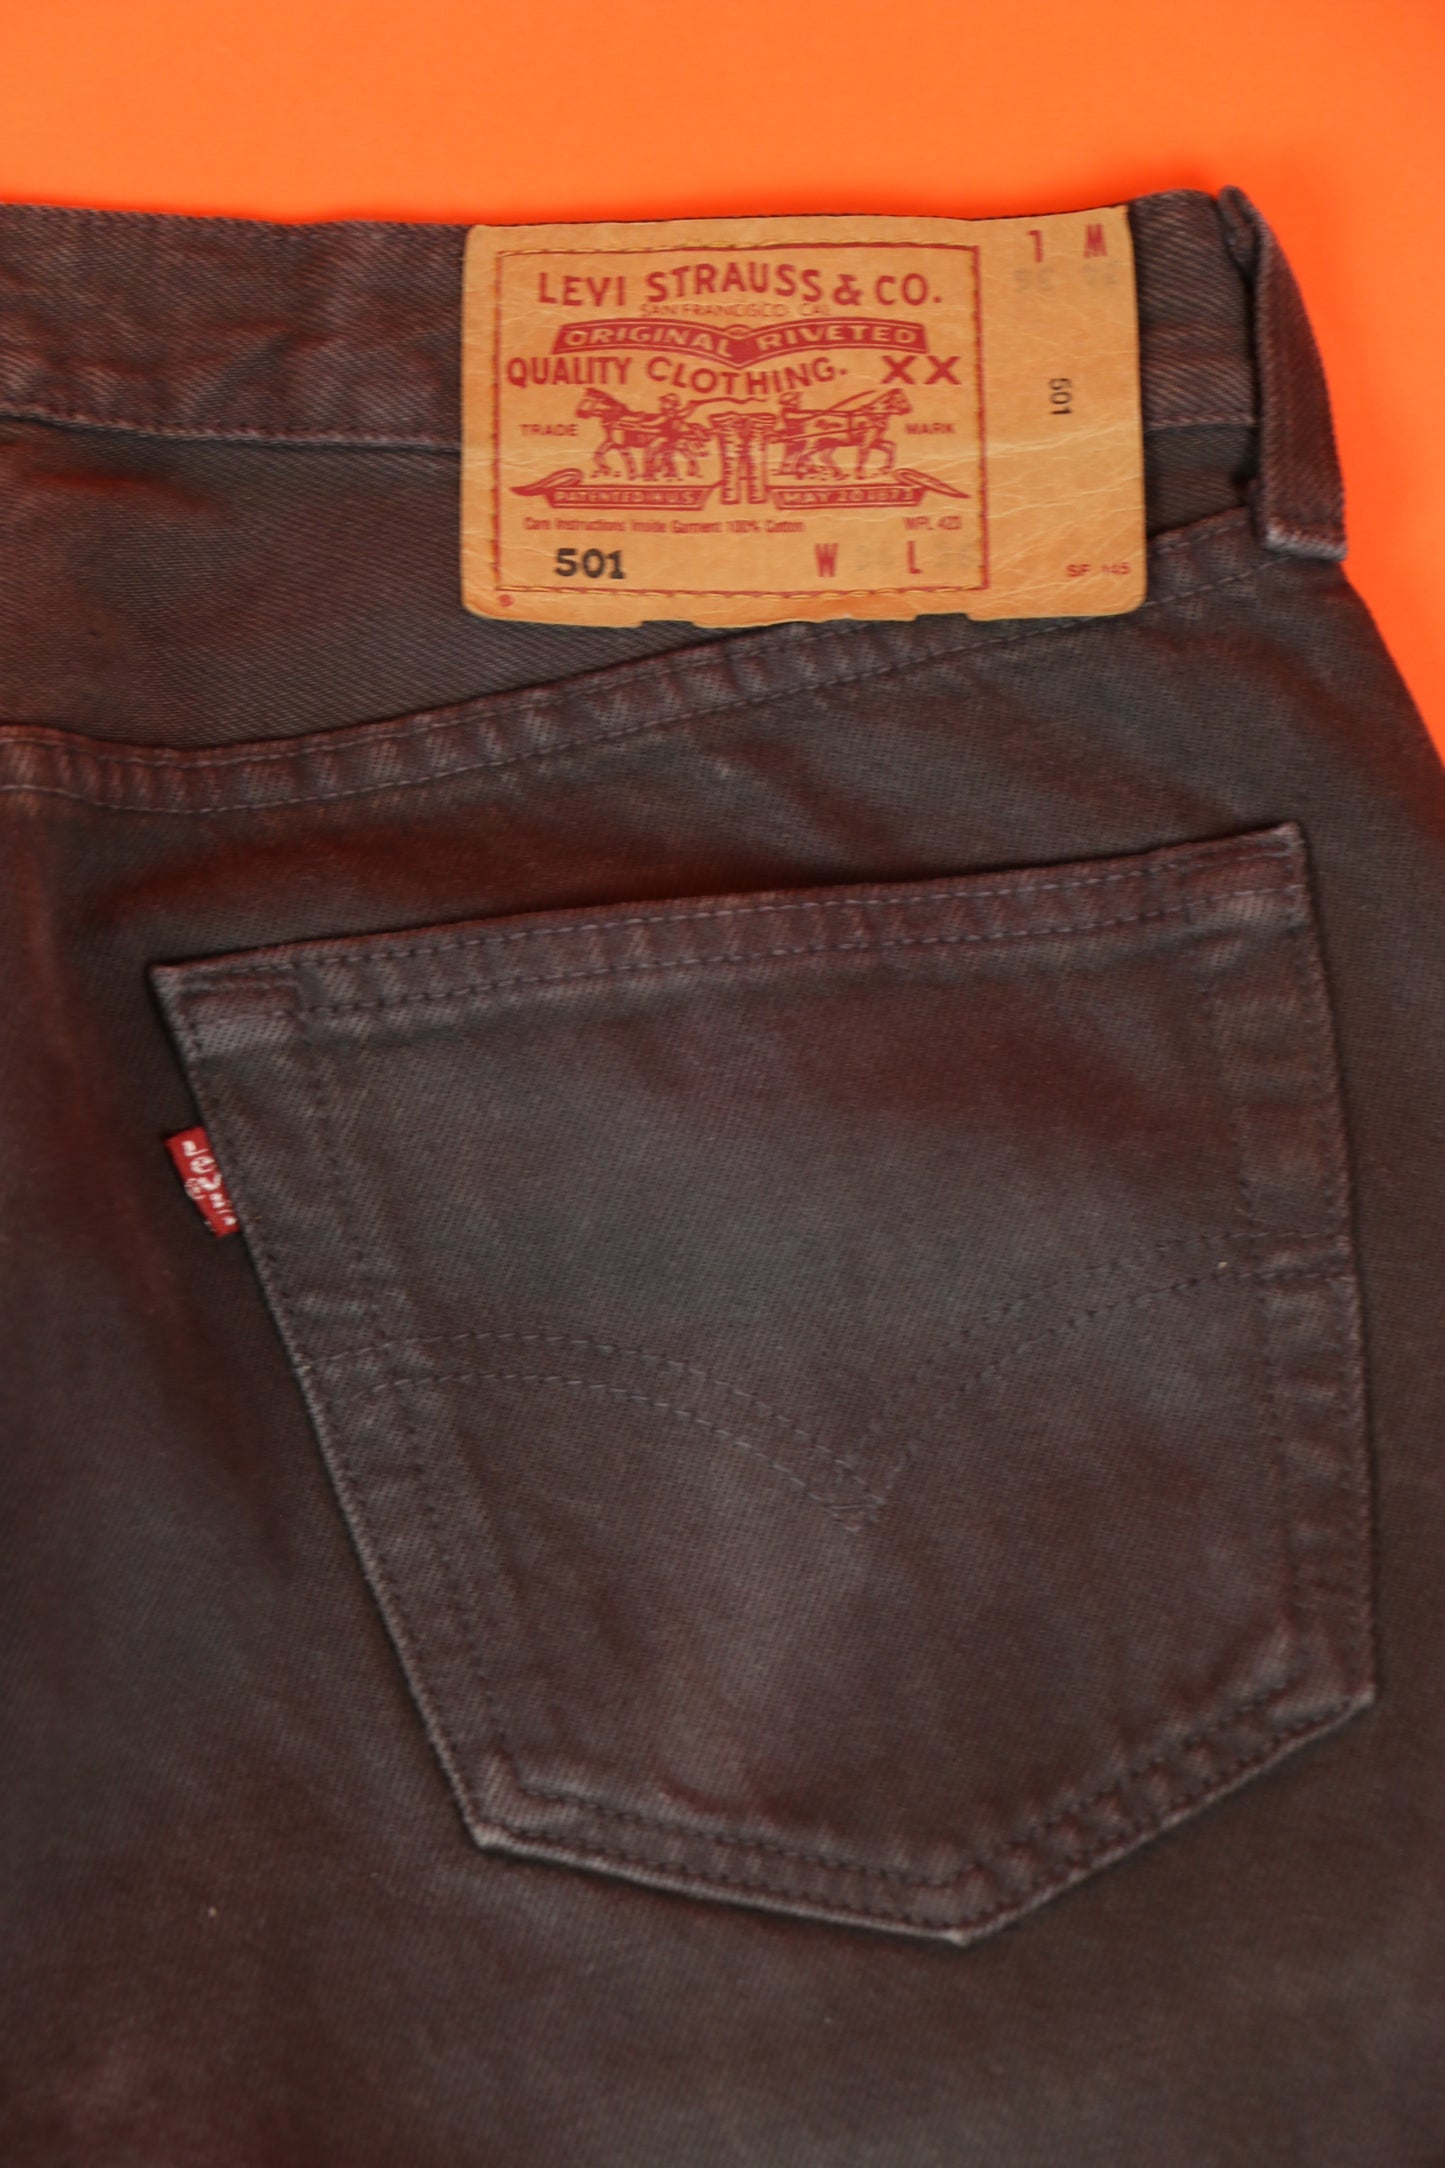 Levi's Made in U.S.A. Jeans W34 L36 - vintage clothing clochard92.com